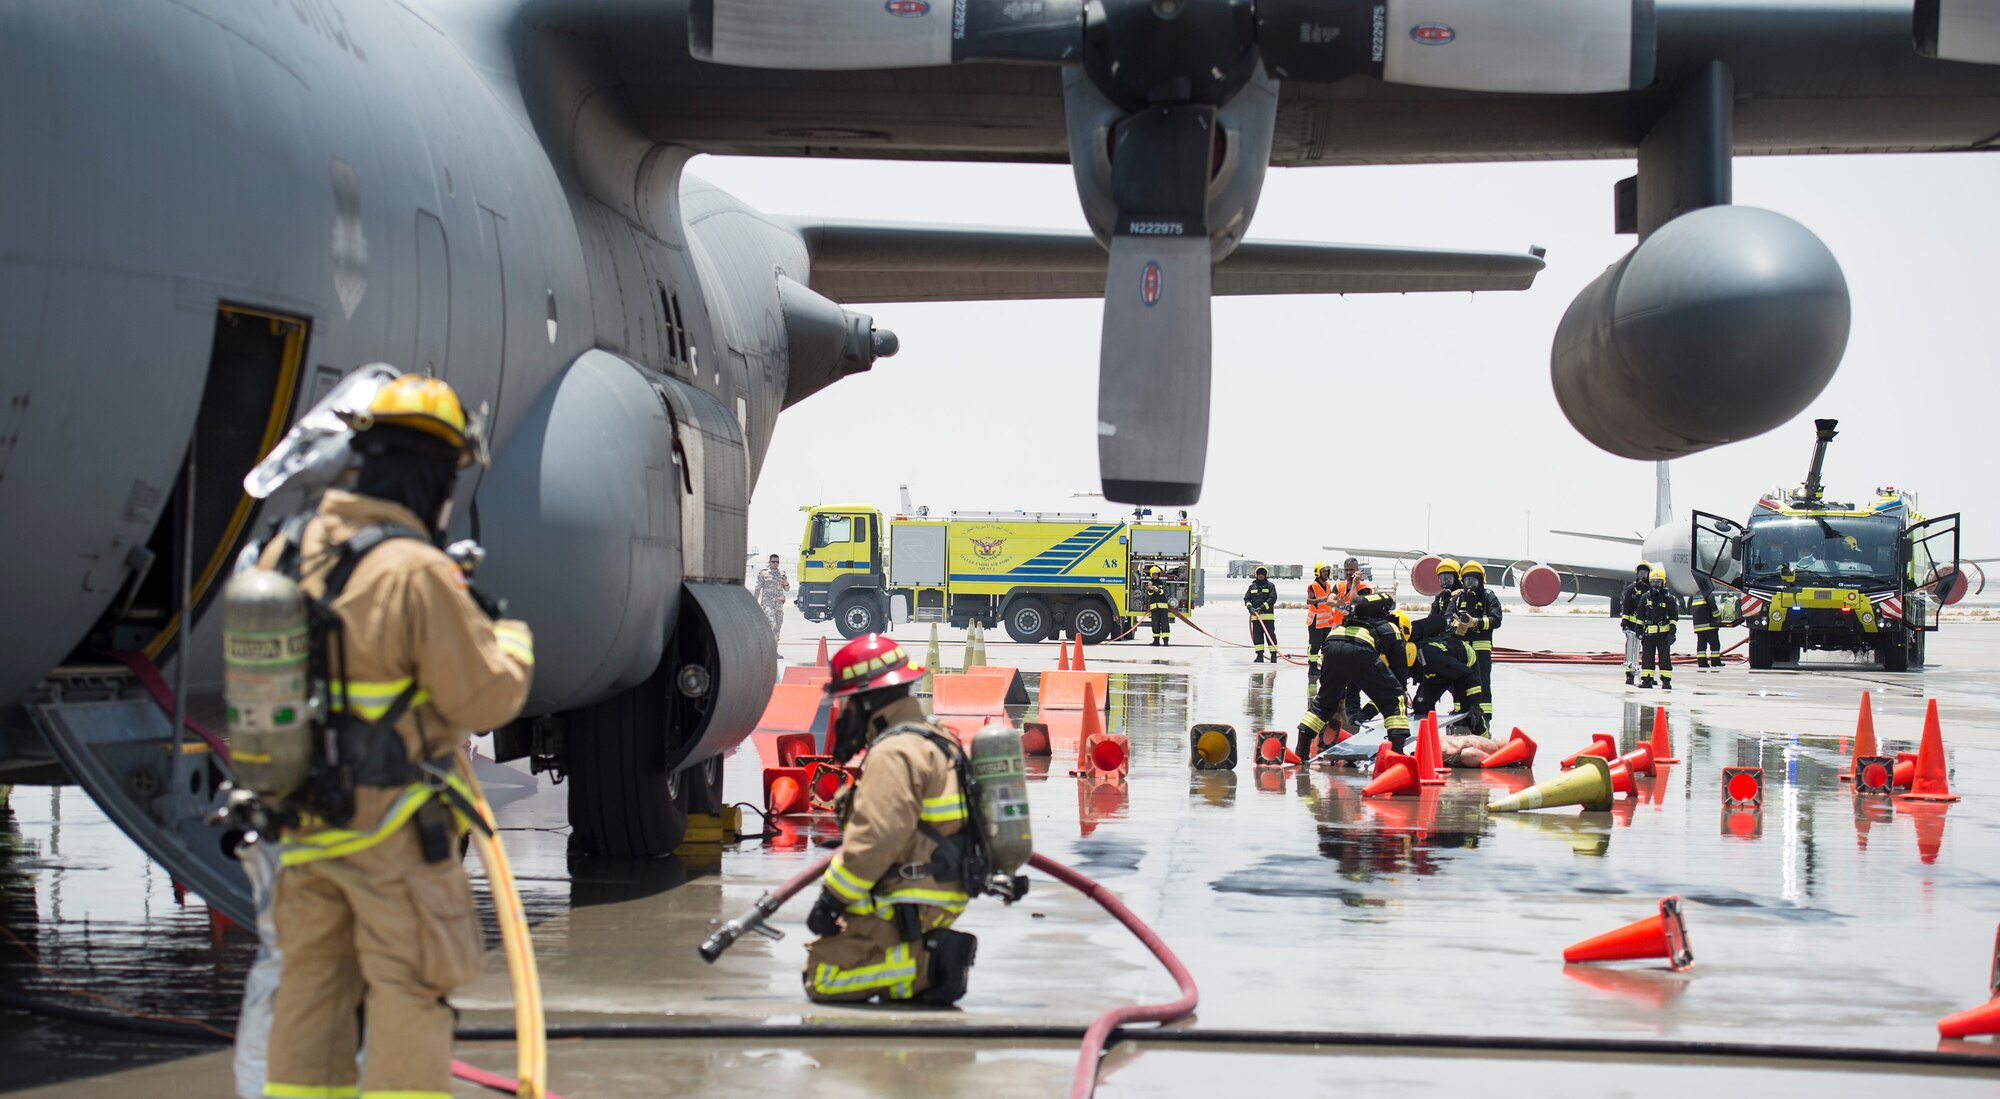 Firefighters with the 379th Expeditionary Civil Engineer Squadron’s Fire and Emergency Services Flight and the Qatar Emiri Air Force Fire Department respond to a simulated aircraft explosion during a joint C-130 Hercules aircraft exercise at Al Udeid Air Base, Qatar, Aug. 1, 2017.